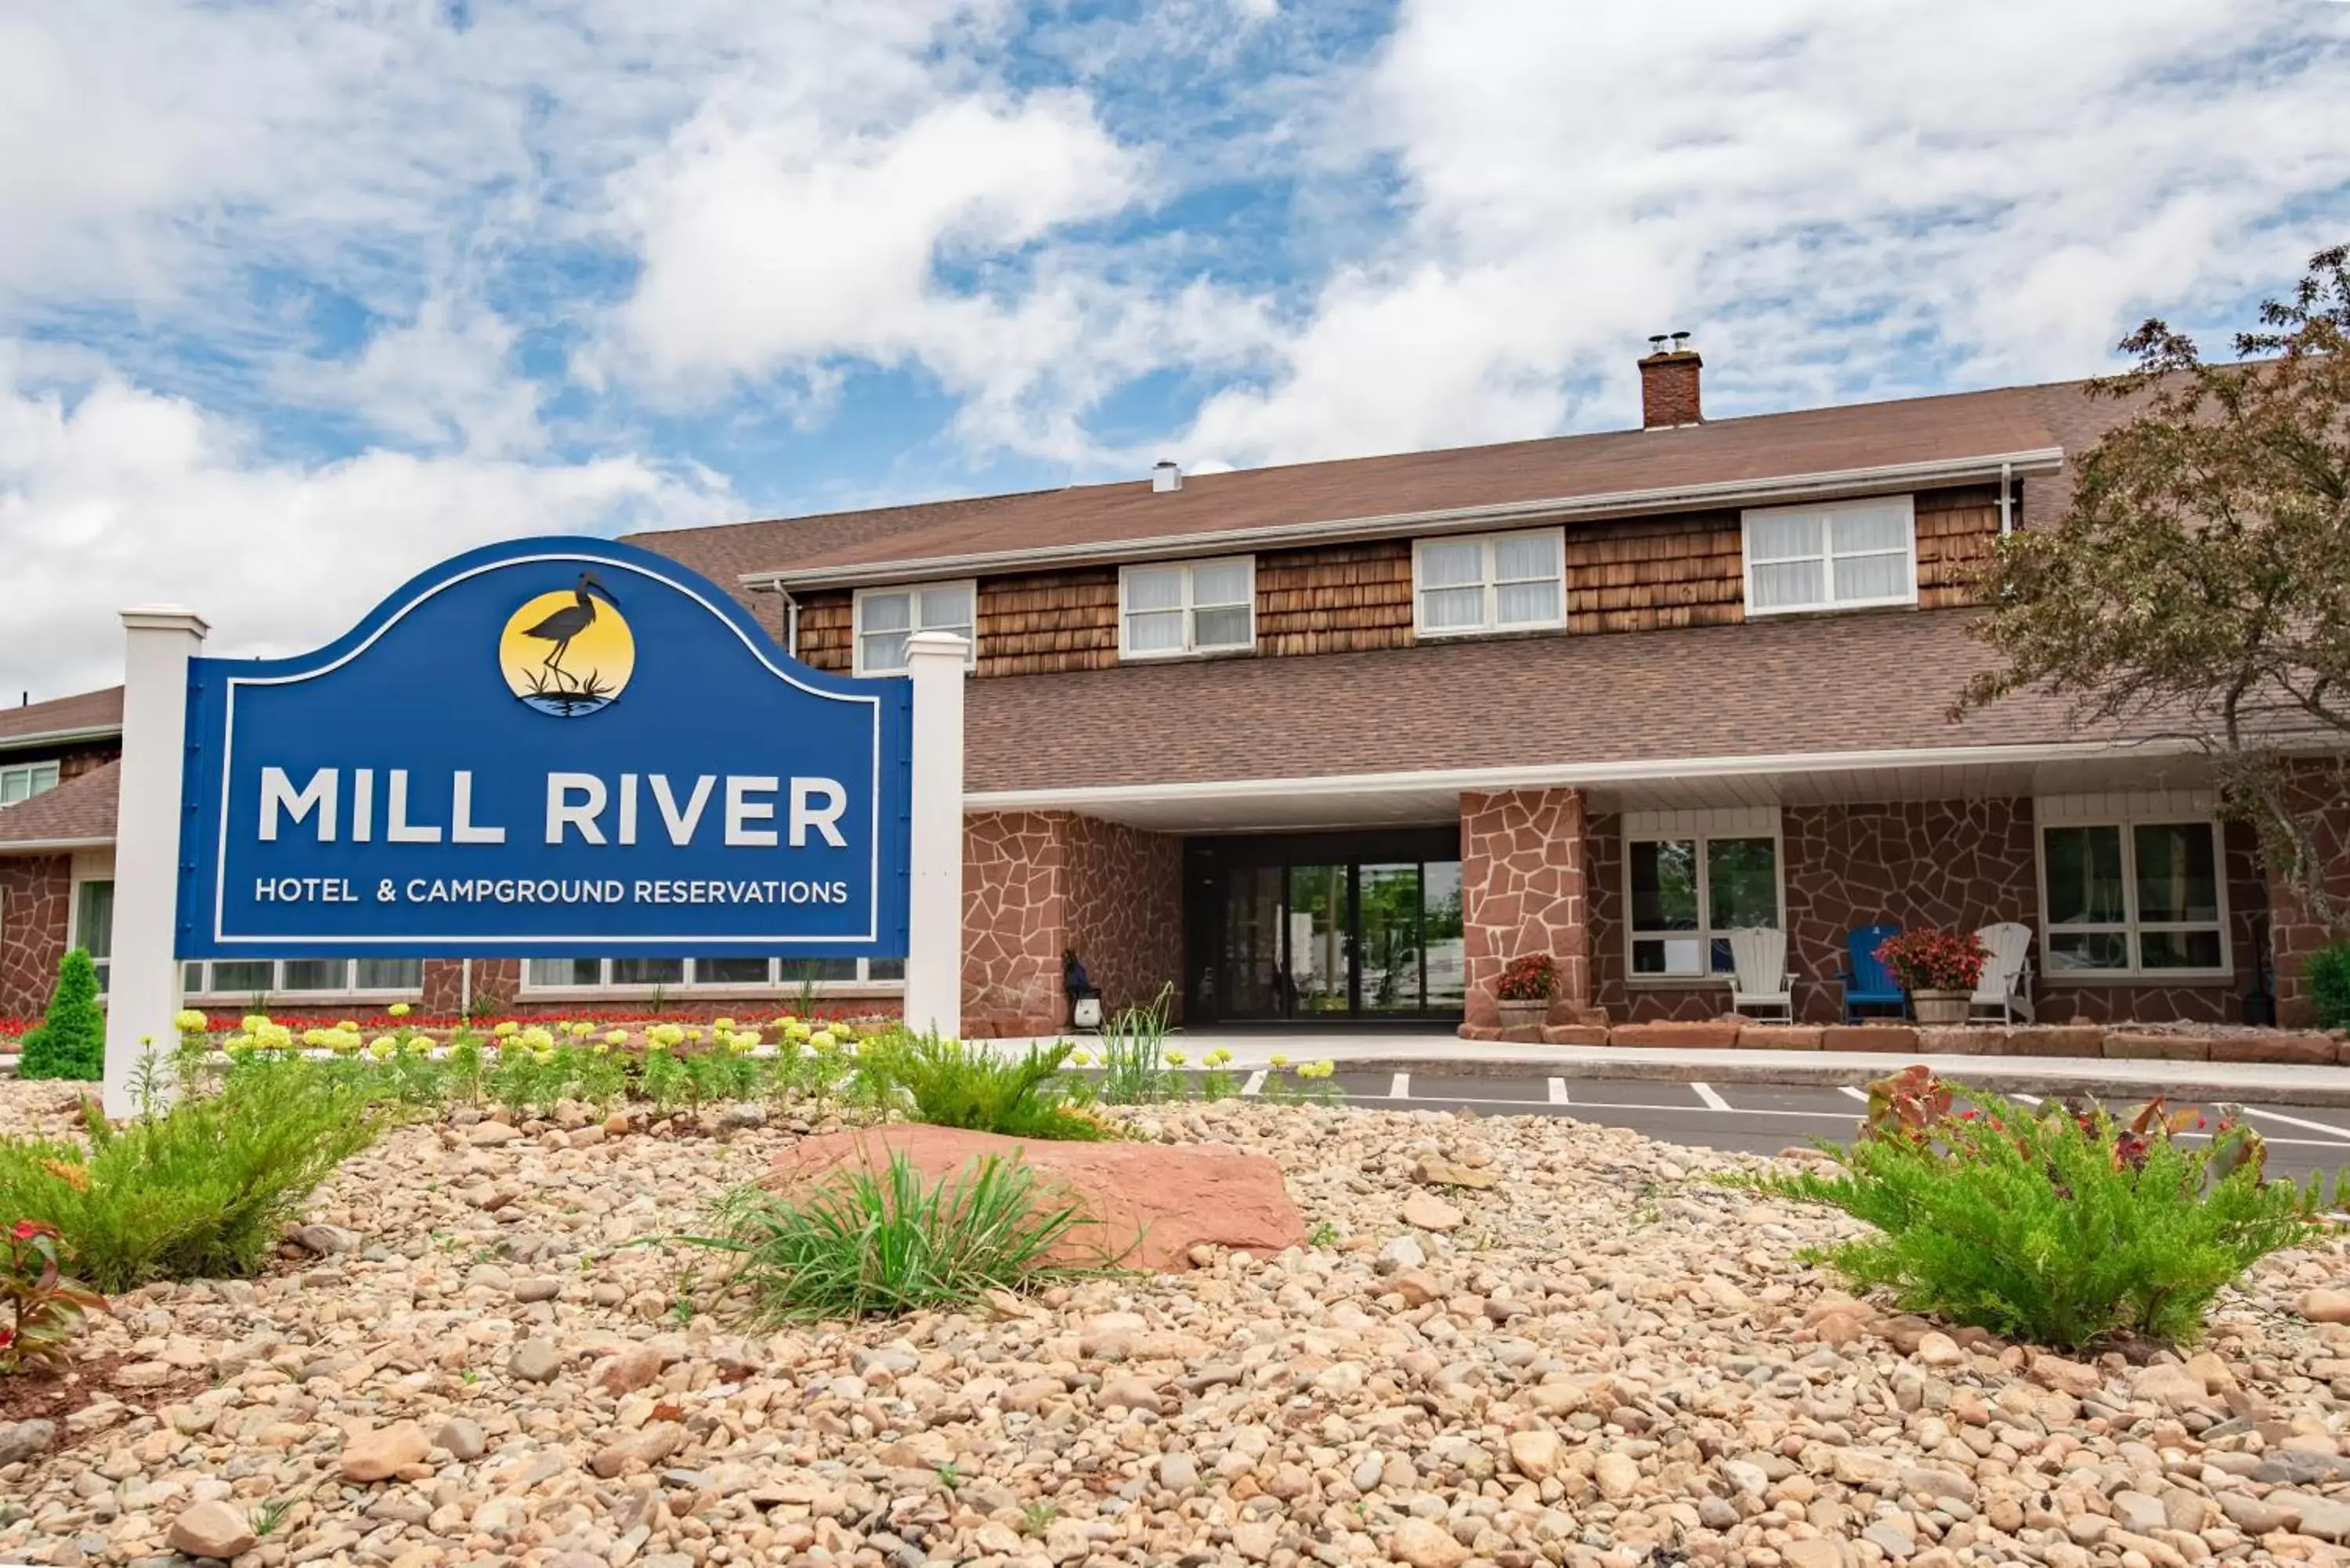 Property Building in Mill River Resort